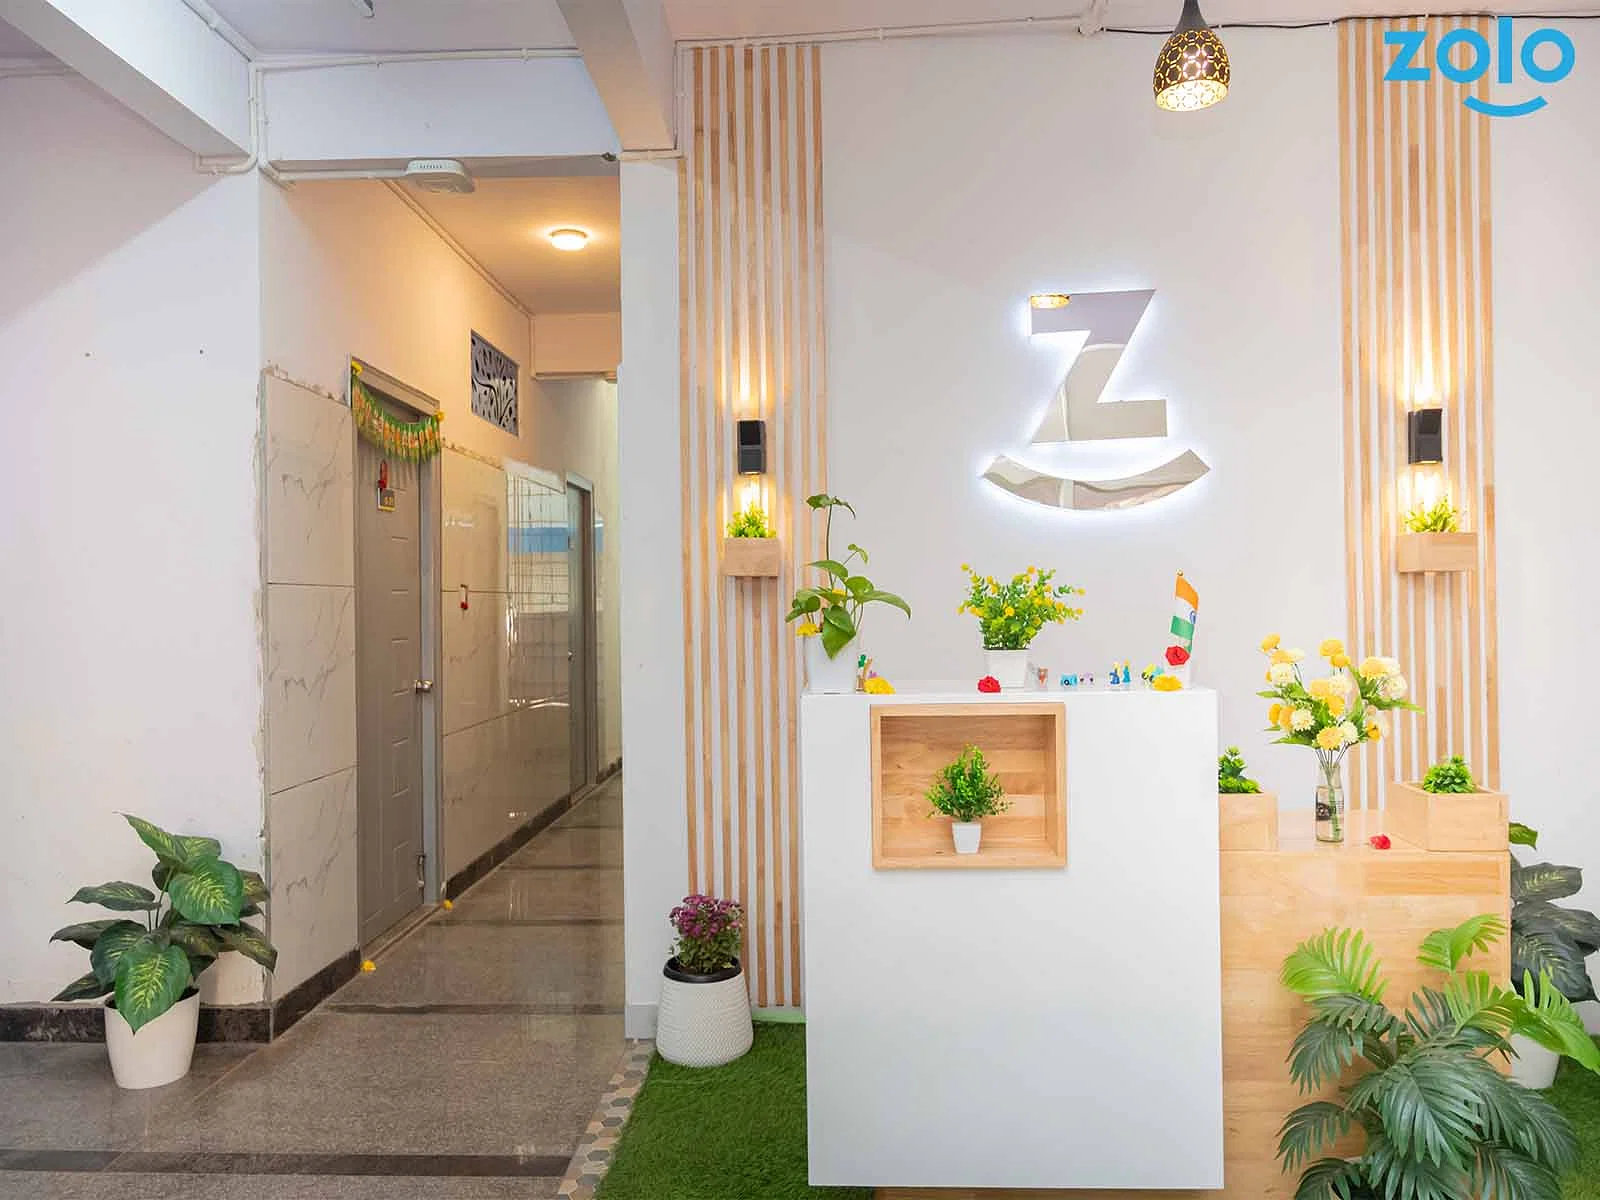 budget-friendly PGs and hostels for boys and girls with single rooms with daily hopusekeeping-Zolo Leela